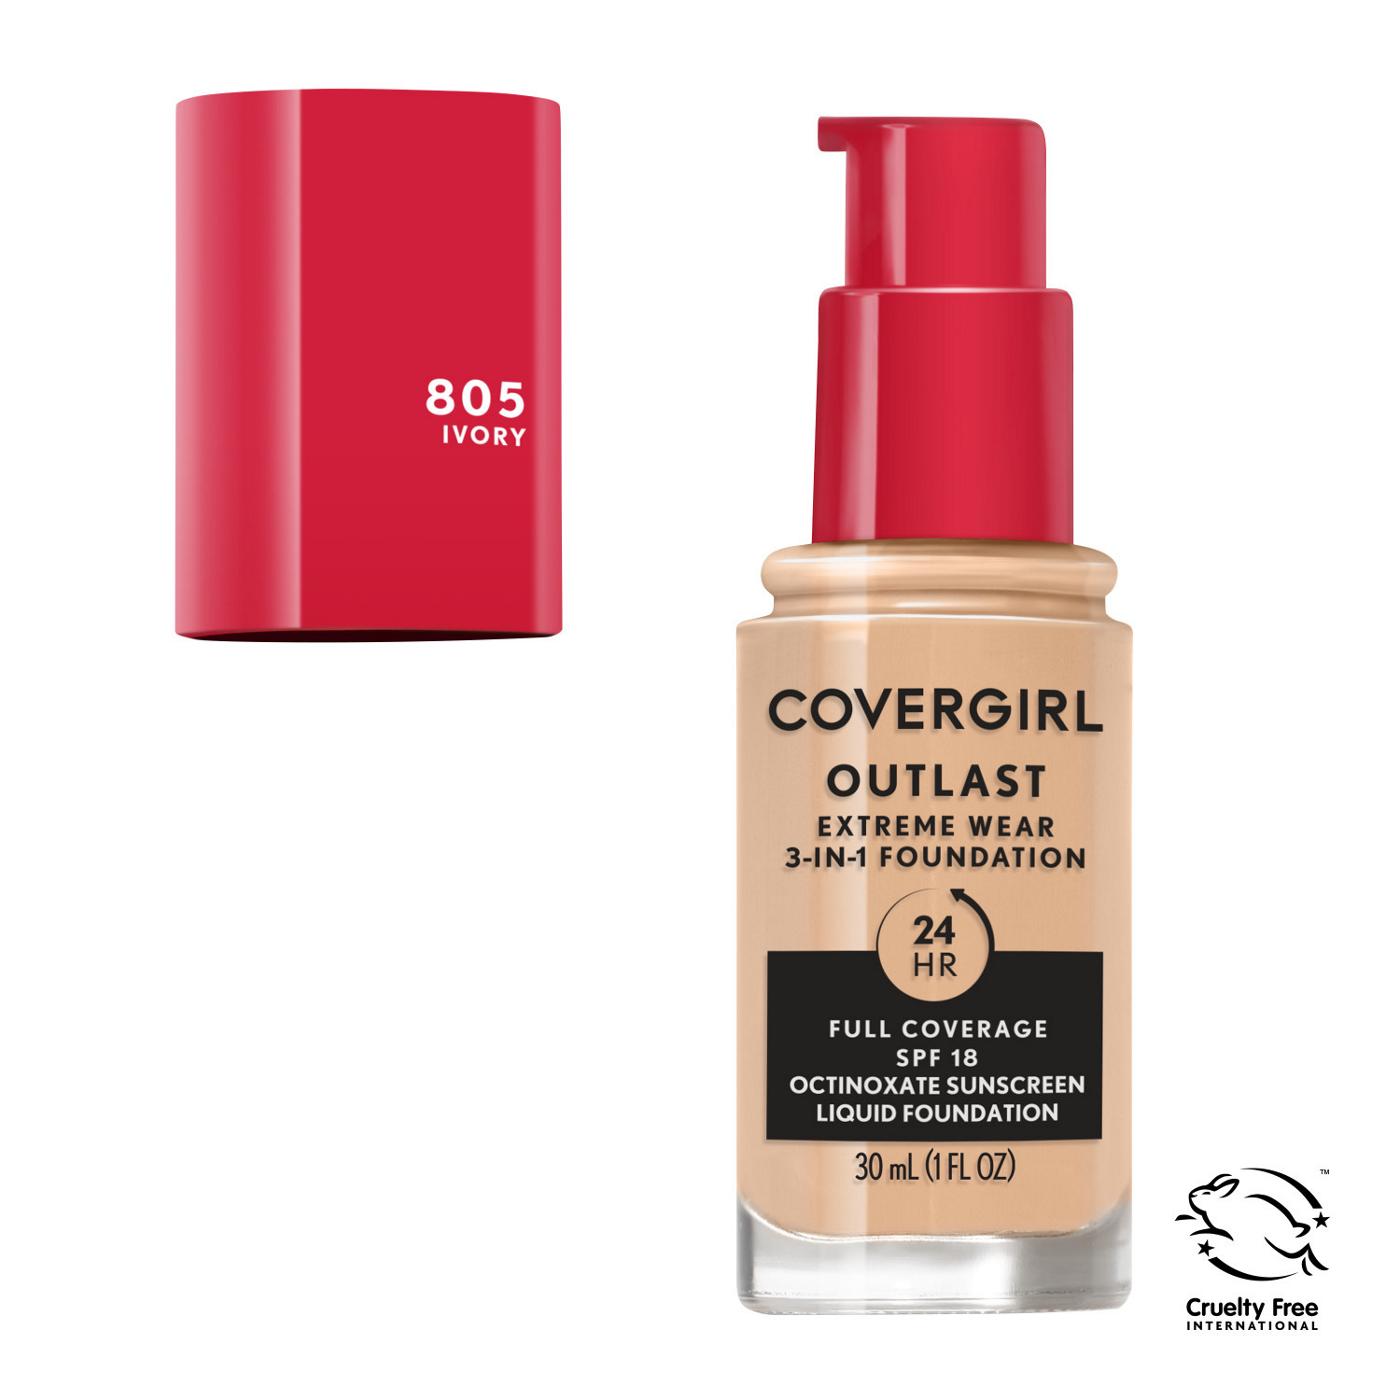 Covergirl Outlast Extreme Wear Liquid Foundation 805 Ivory; image 7 of 11